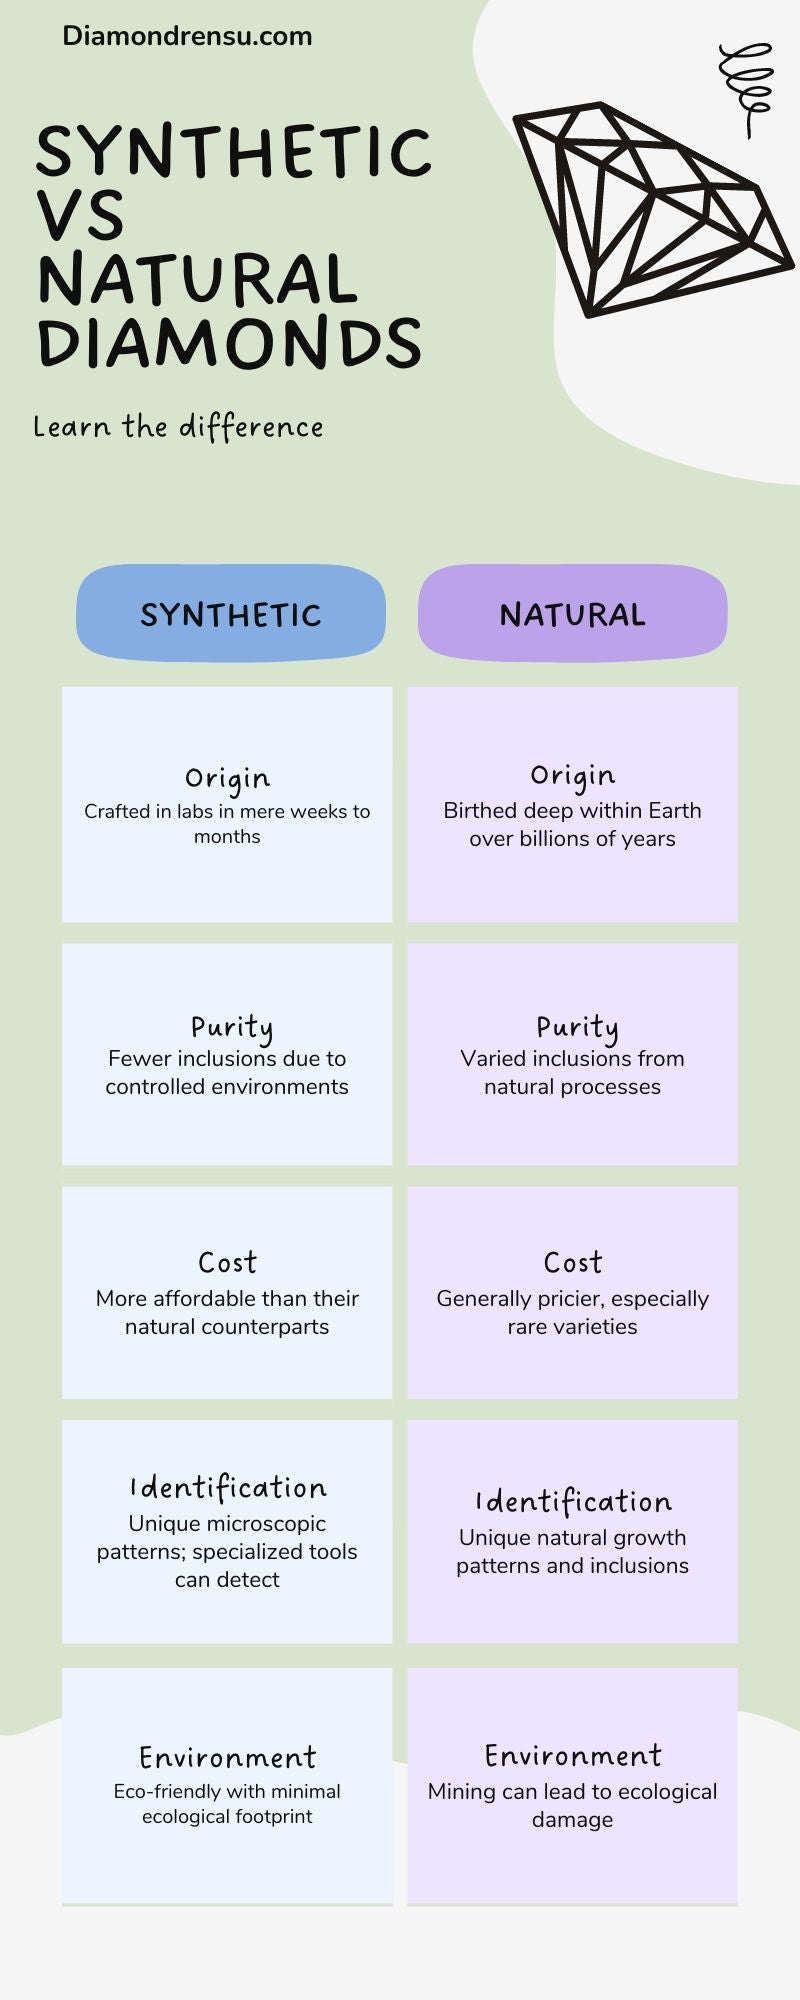 Synthetic vs natural diamonds infographic